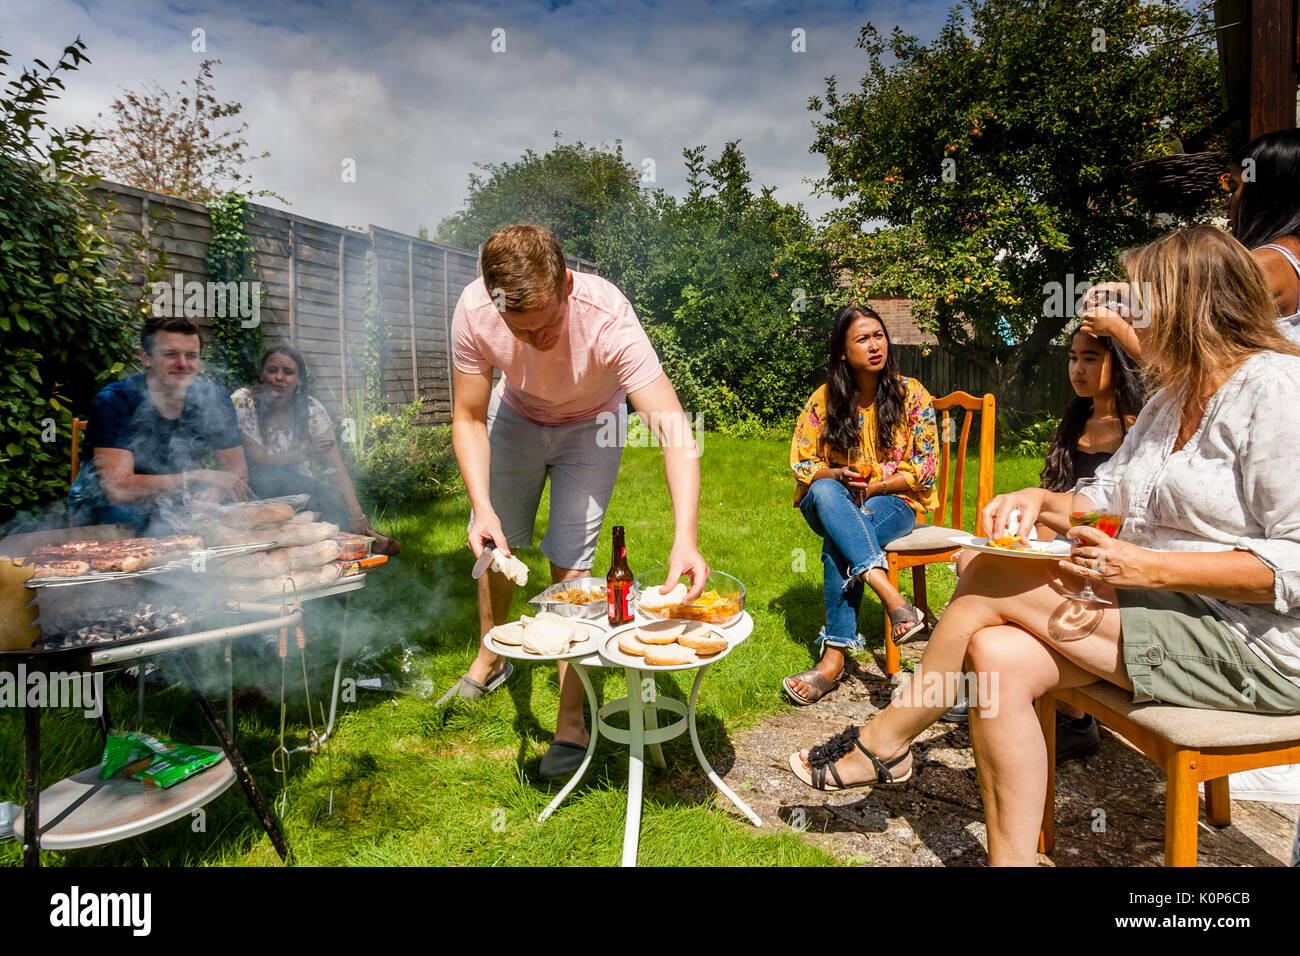 A Young Man Cooking Food At A Traditional Family Barbecue, Sussex, UK Stock Photo